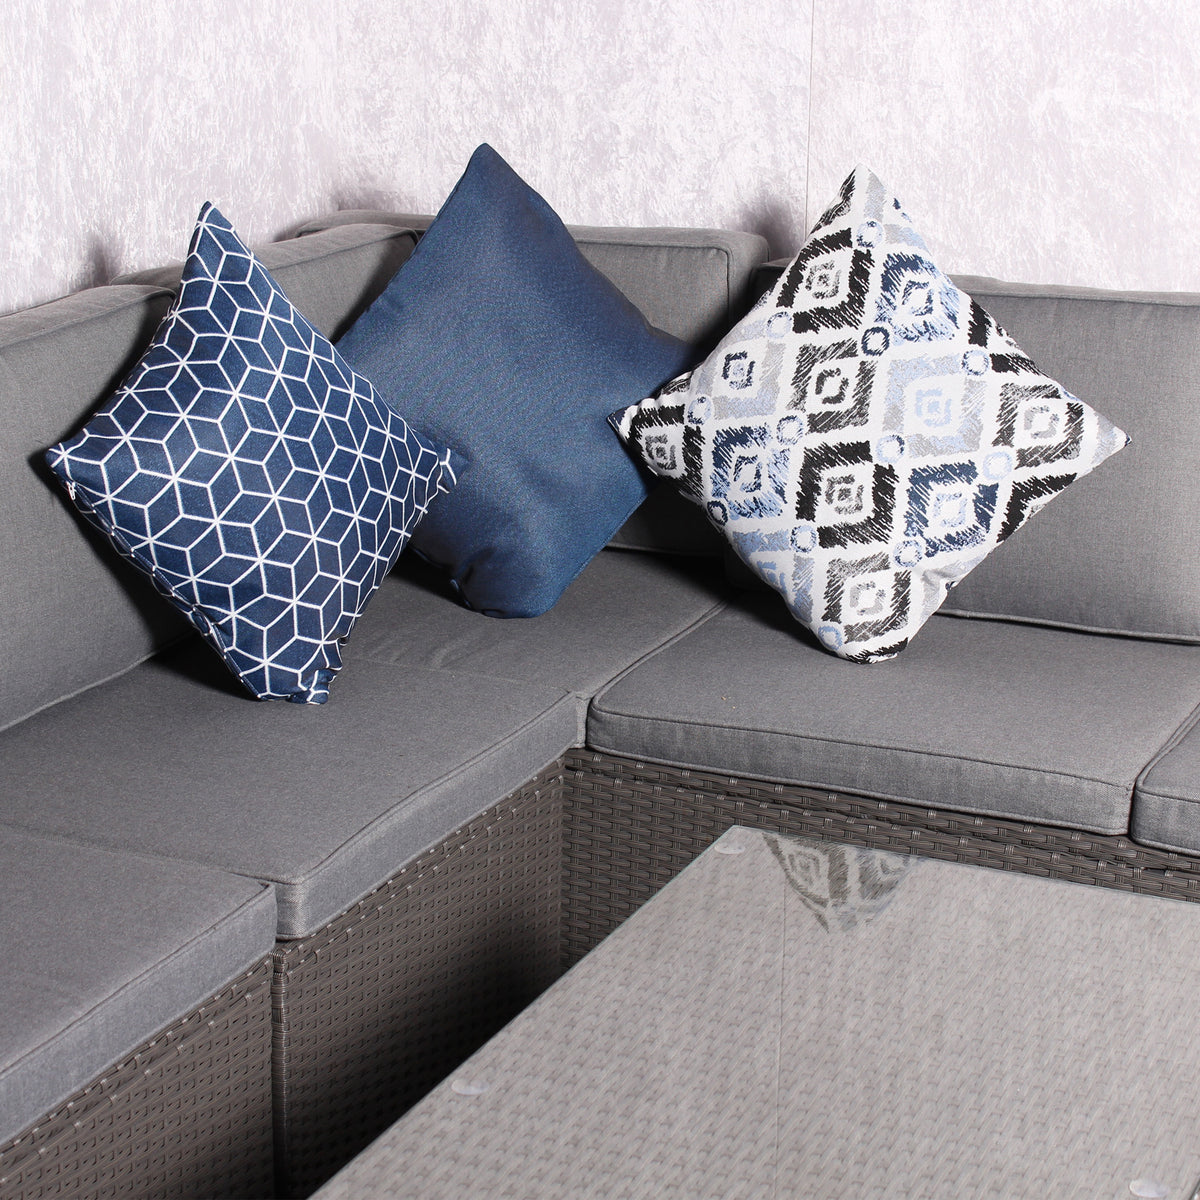 Outdoor Blue Patterned Scatter Cushion